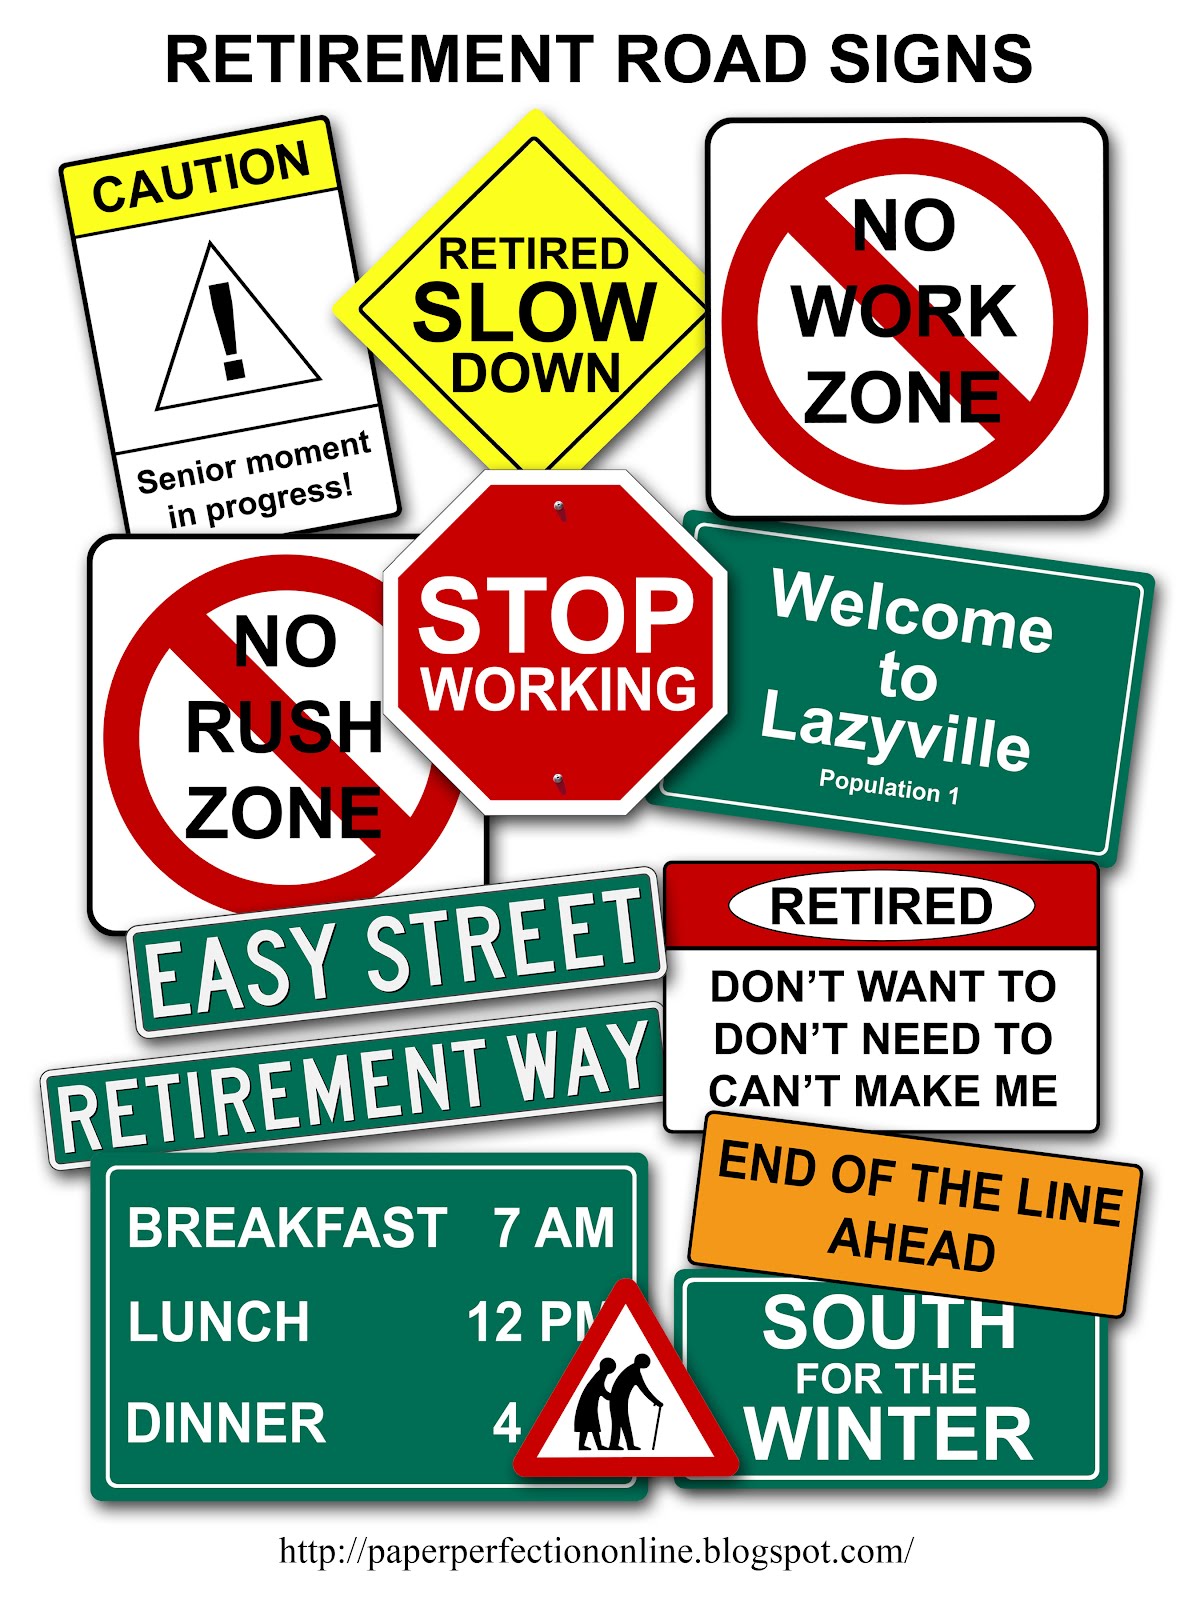 paper-perfection-retirement-road-signs